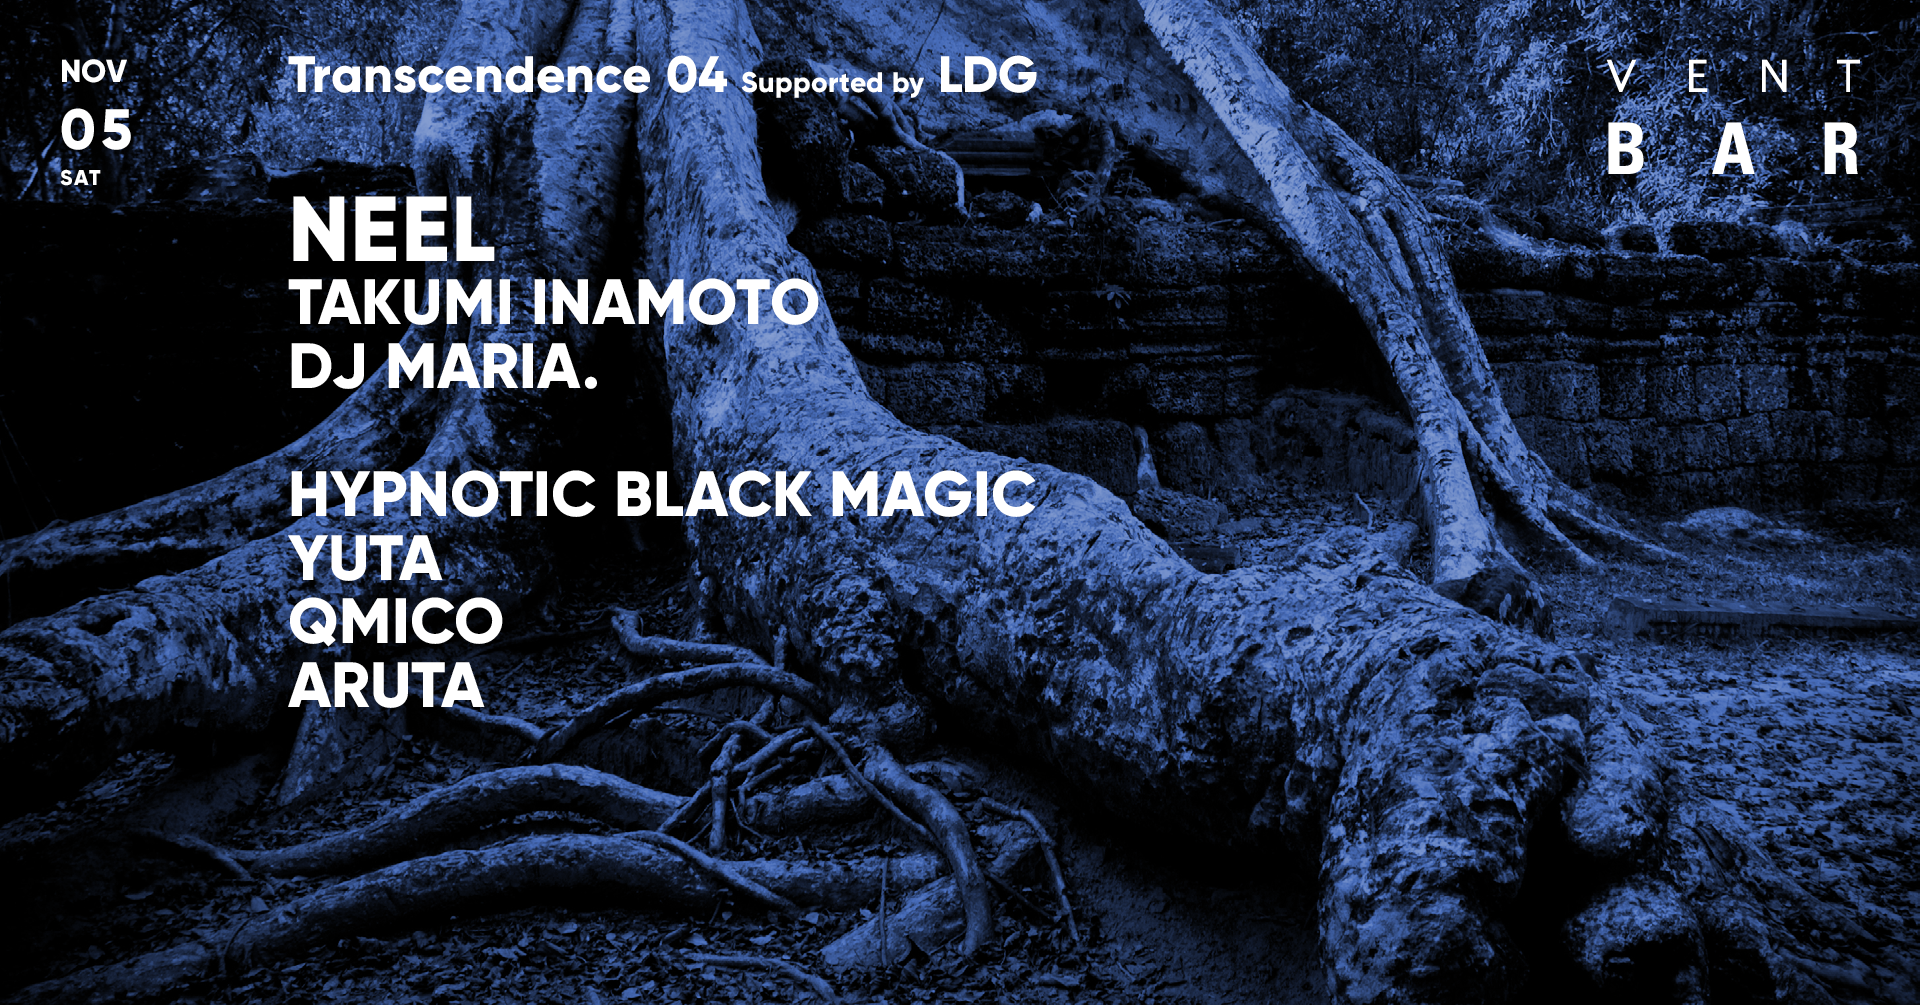 Neel / Transcendence 04 Supported by LDG